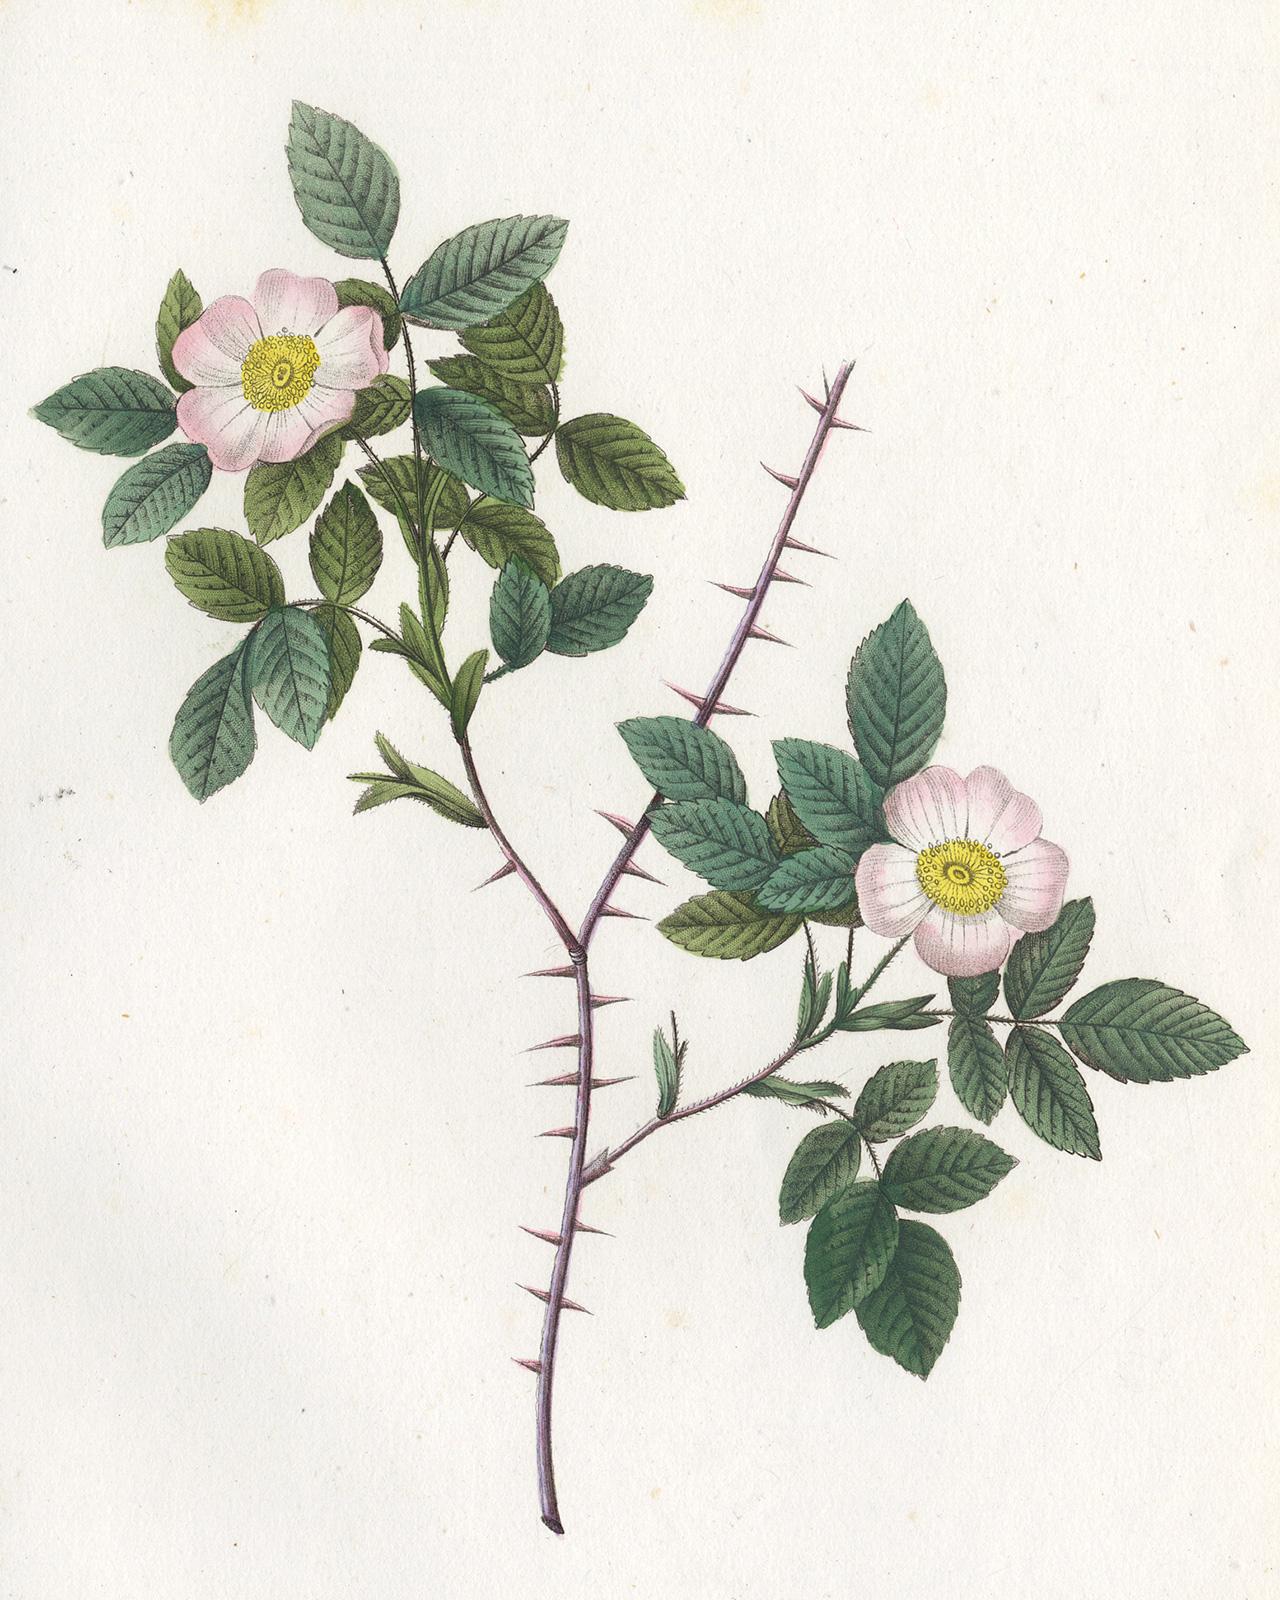 White Alpine Rose by Redoute - Les Roses - Handcoloured engraving - 19th century - Print by Pierre-Joseph Redouté